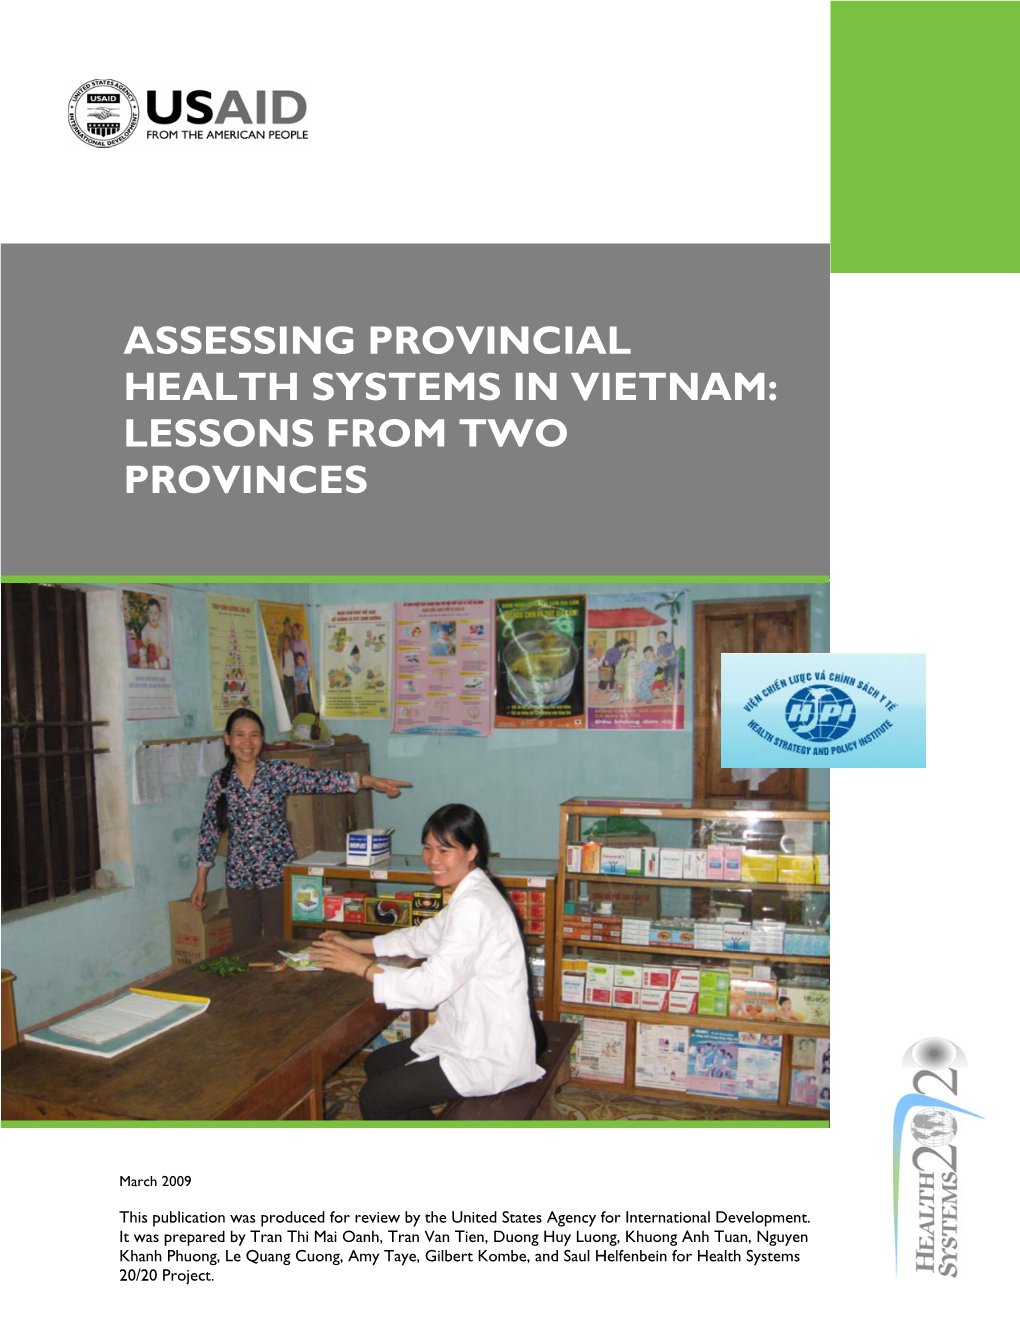 Assessing Provincial Health Systems in Vietnam: Lessons from Two Provinces